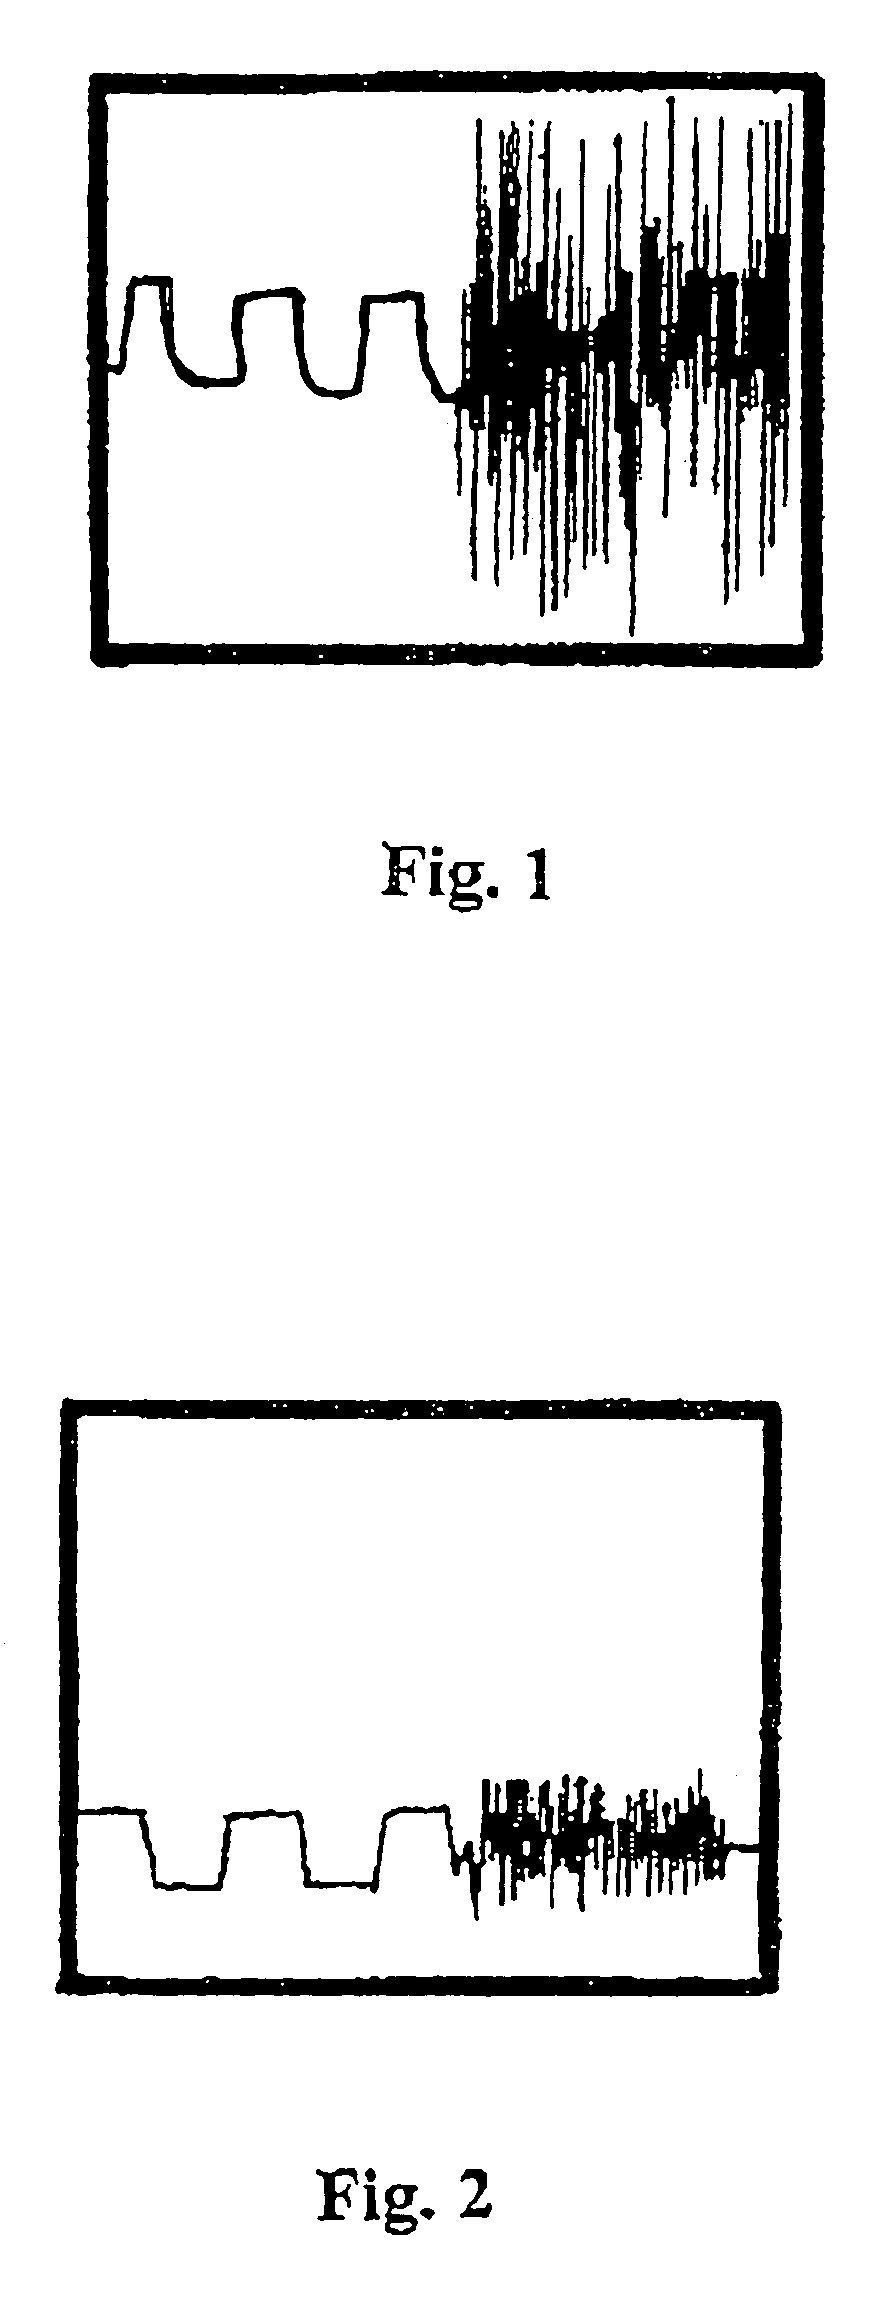 Plastically deformable implant